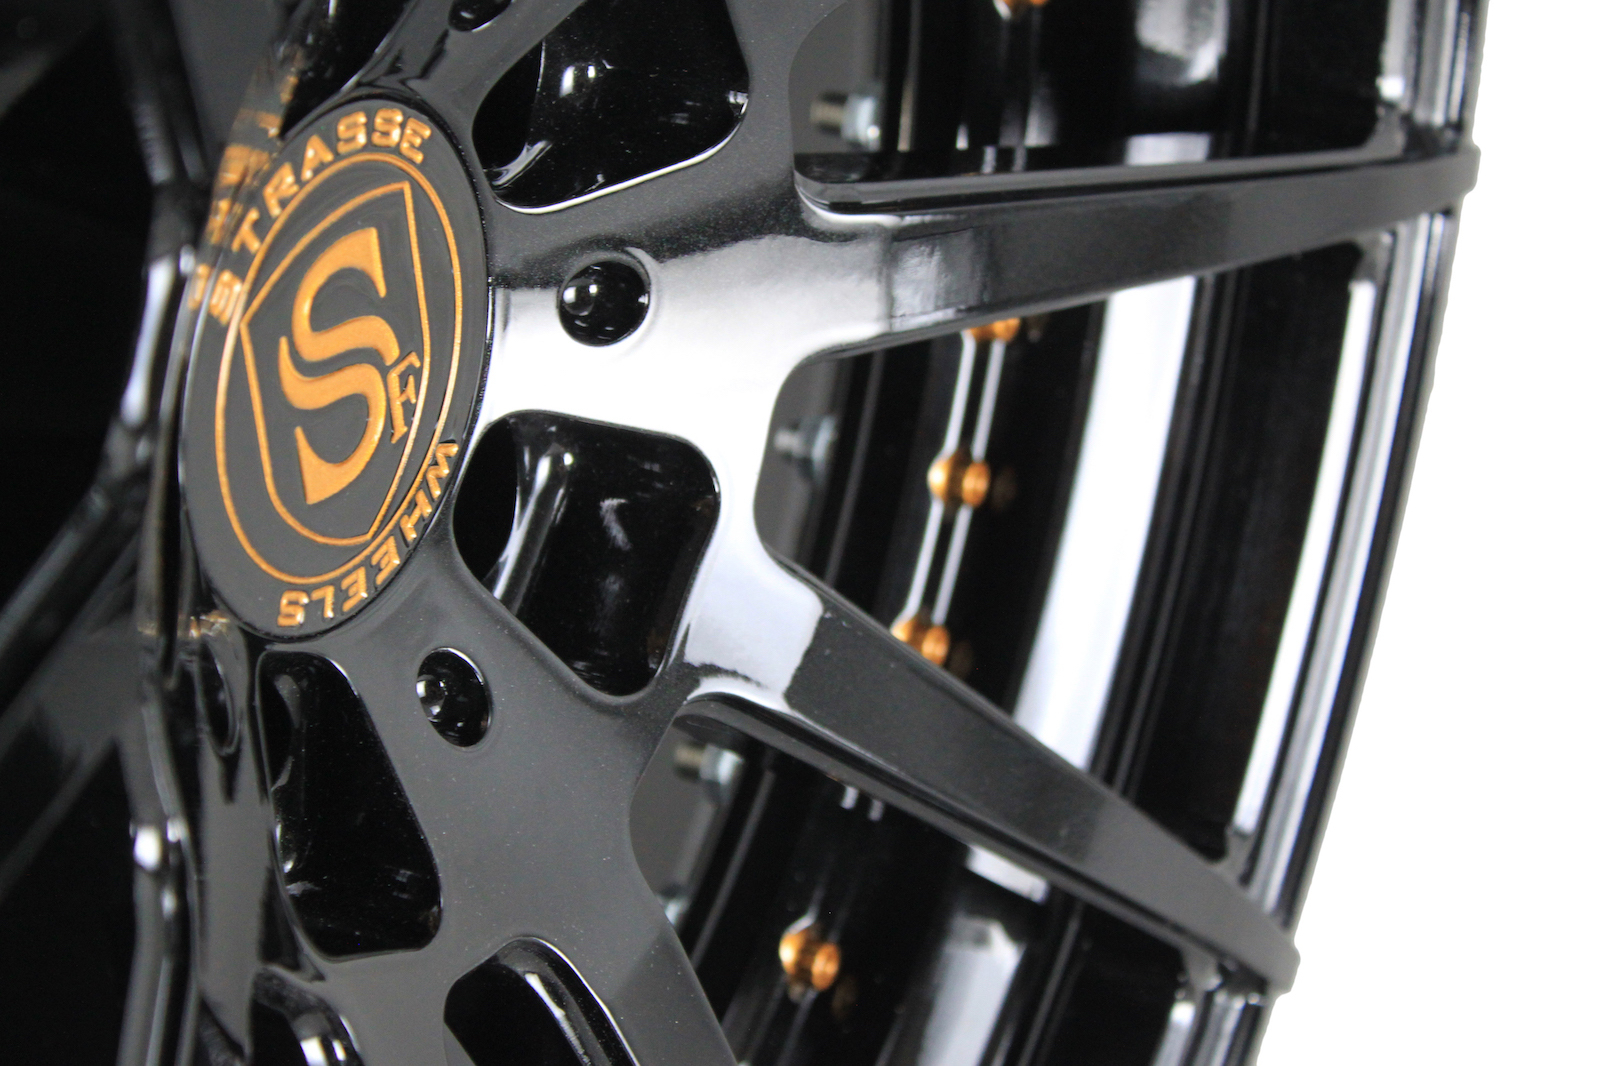 Strasse R10 DEEP CONCAVE DUOBLOCK Forged Wheels